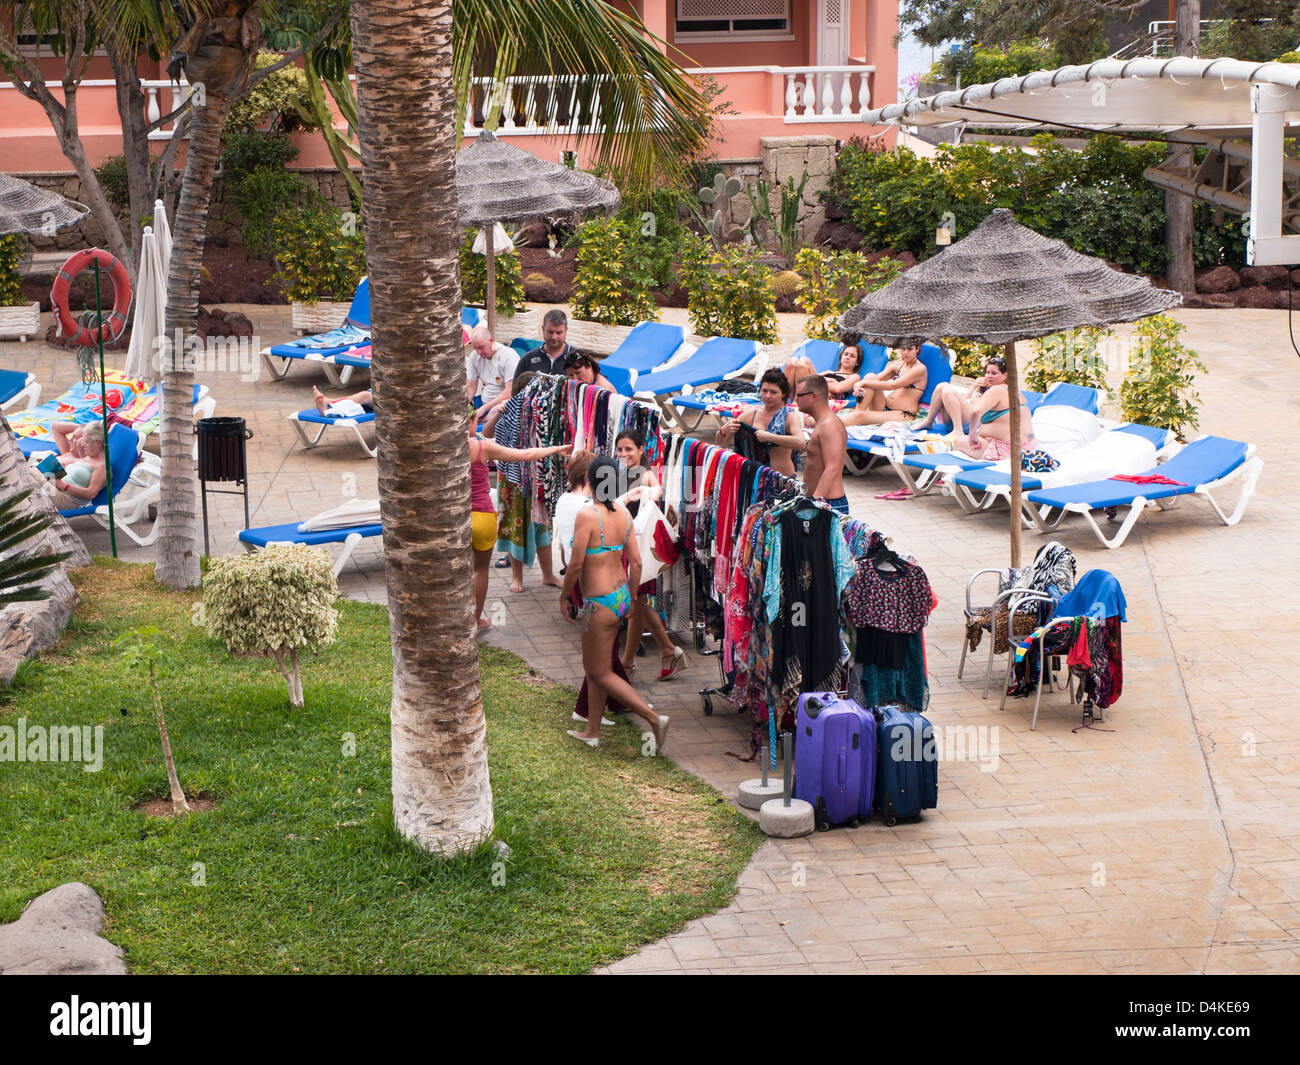 Ambulant vendor of beach clothing on the side of a hotel pool in Tenerife Canary Islands Spain Stock Photo